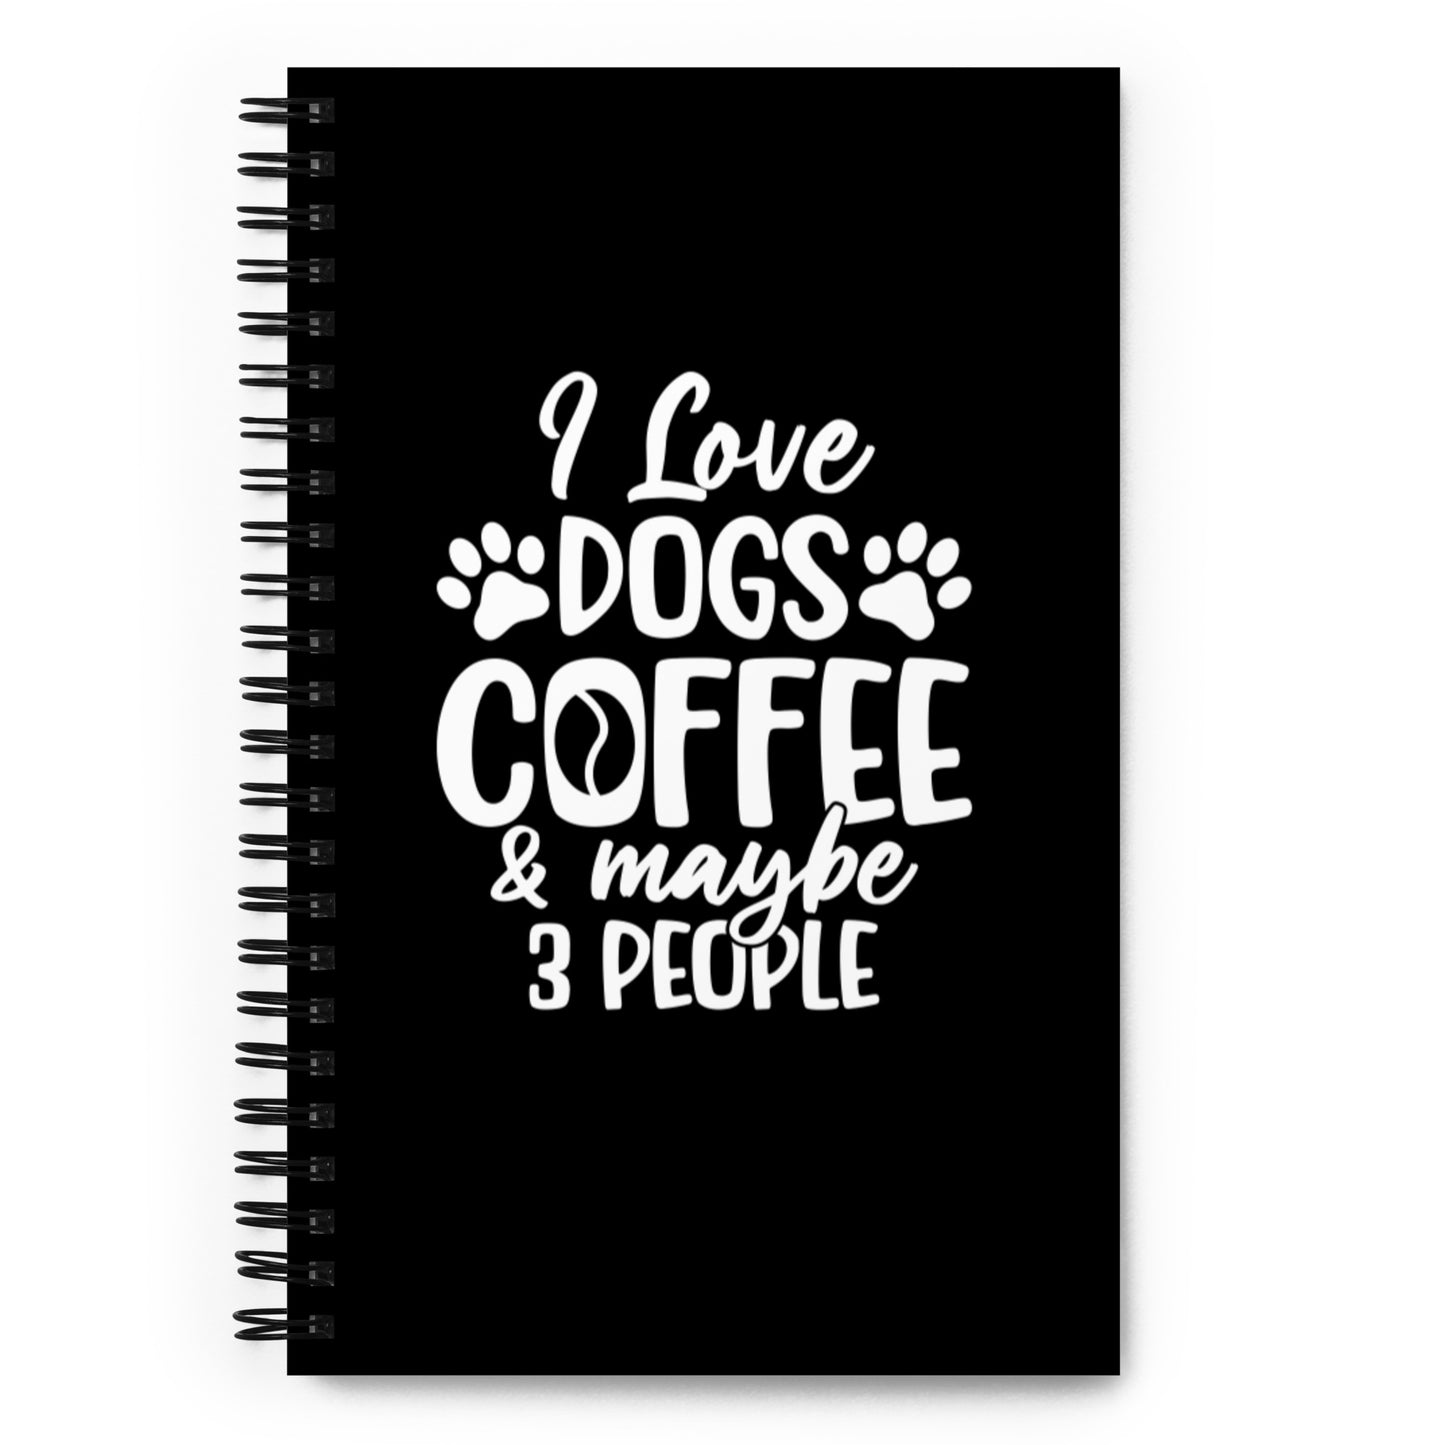 I Love Dogs Coffee & Maybe 3 People Spiral notebook